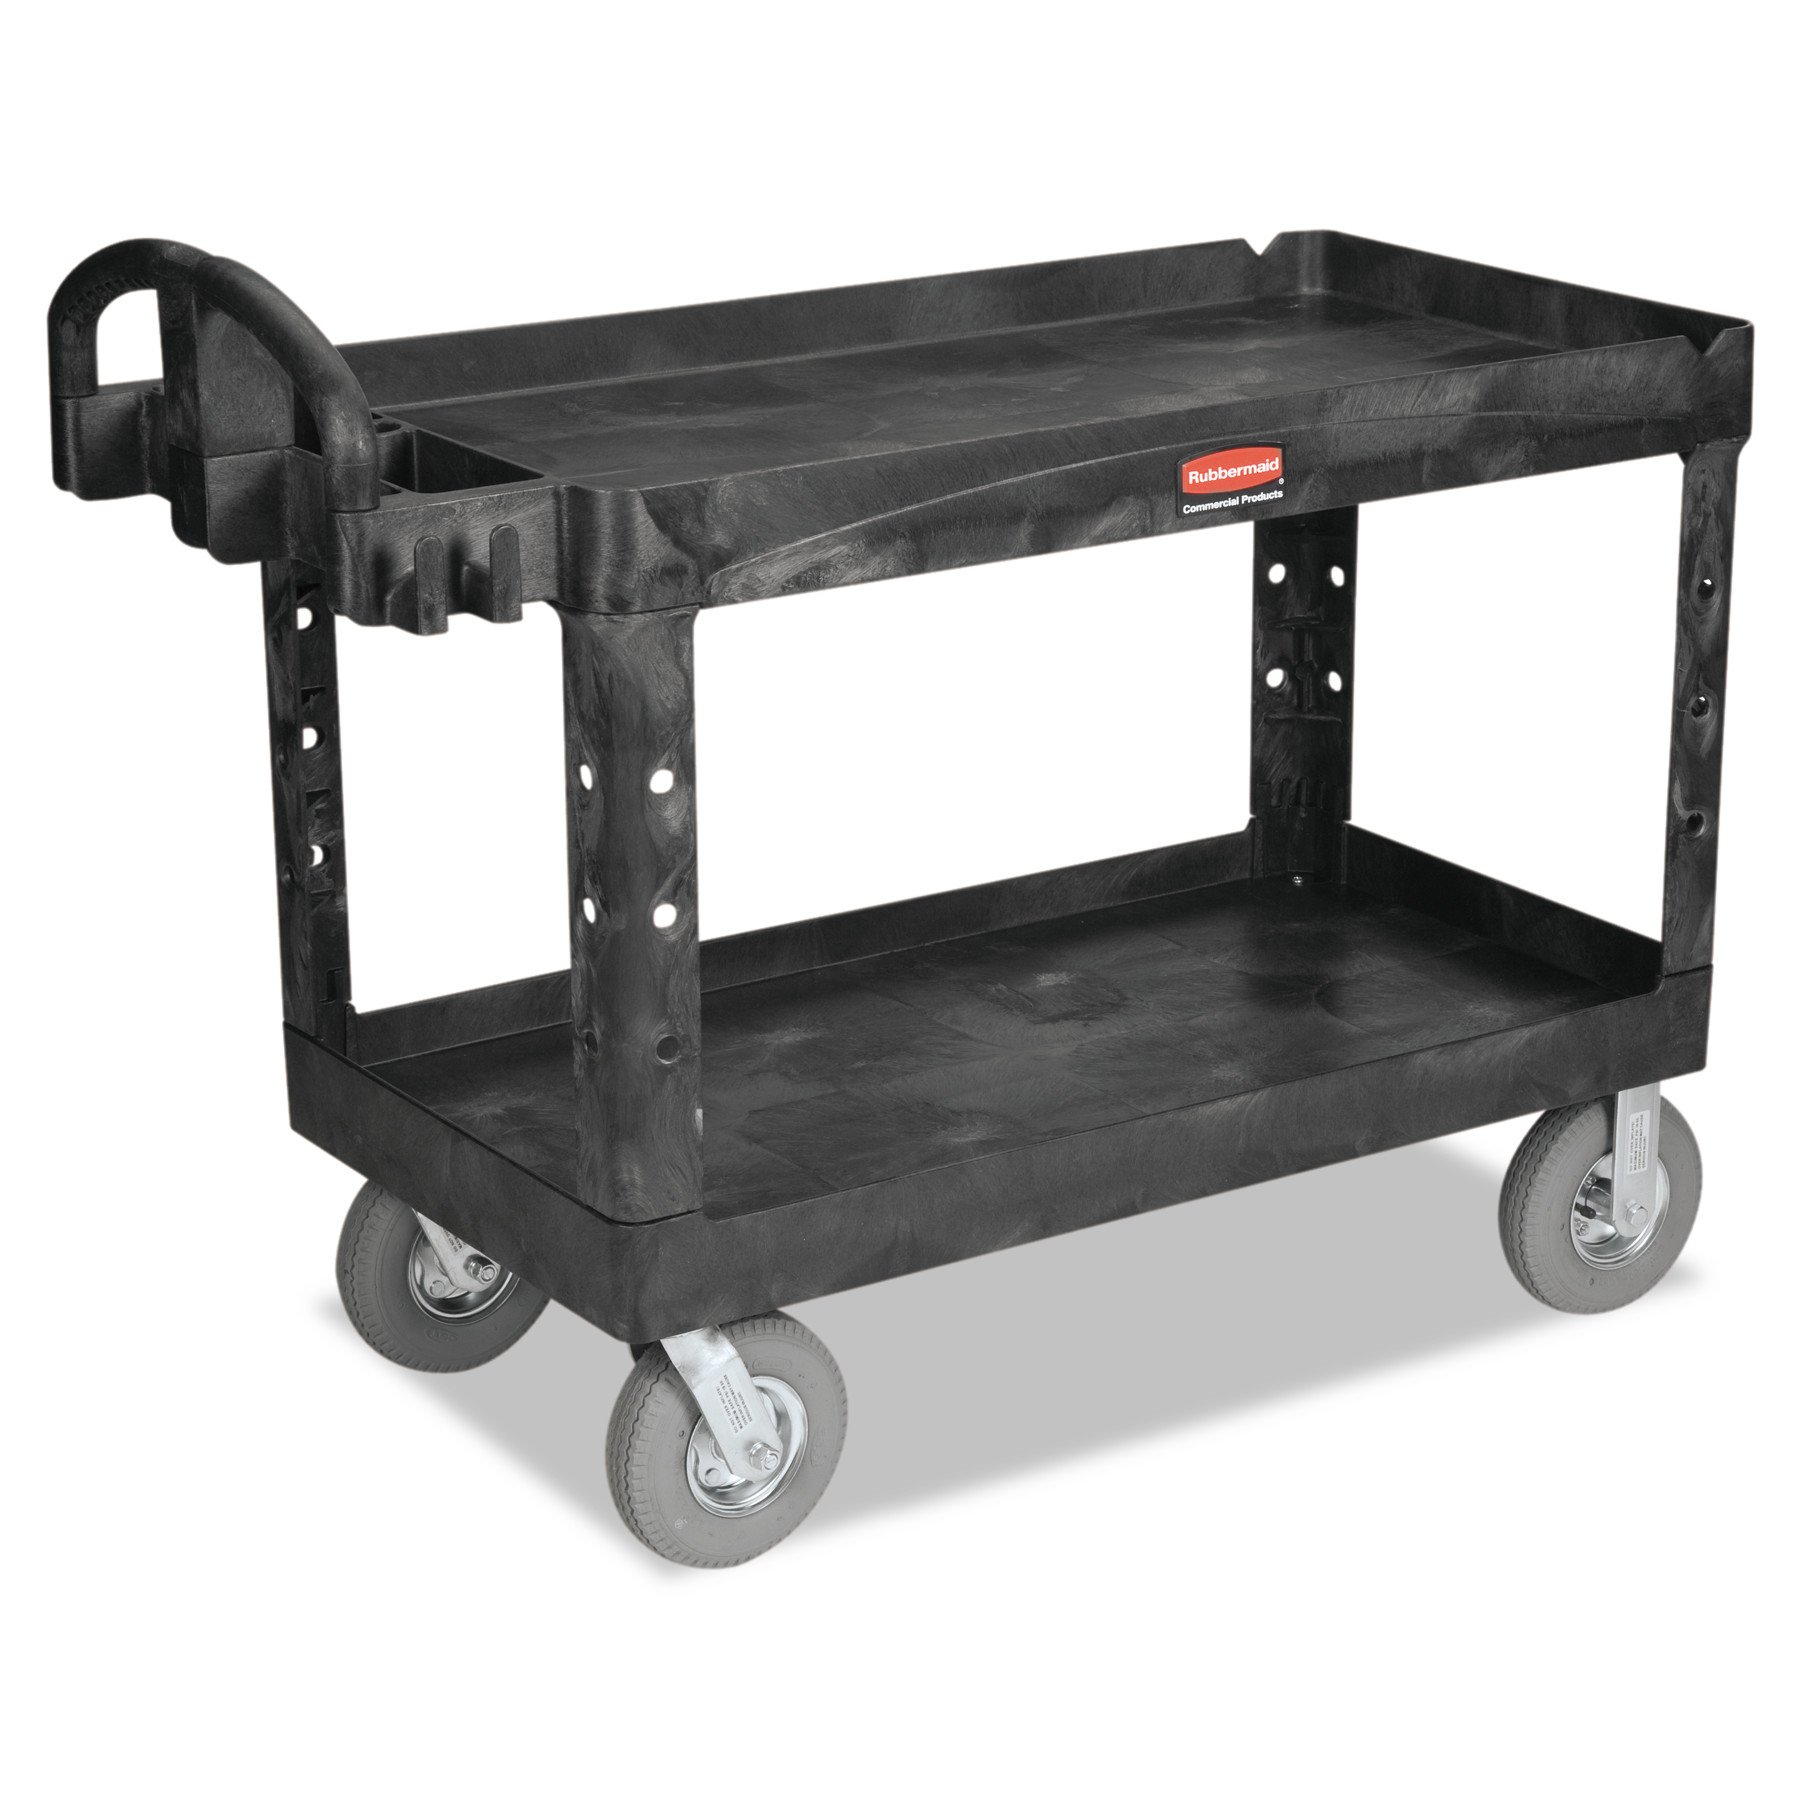 Rubbermaid HD Utility Carts with Lipped Shelves- Black